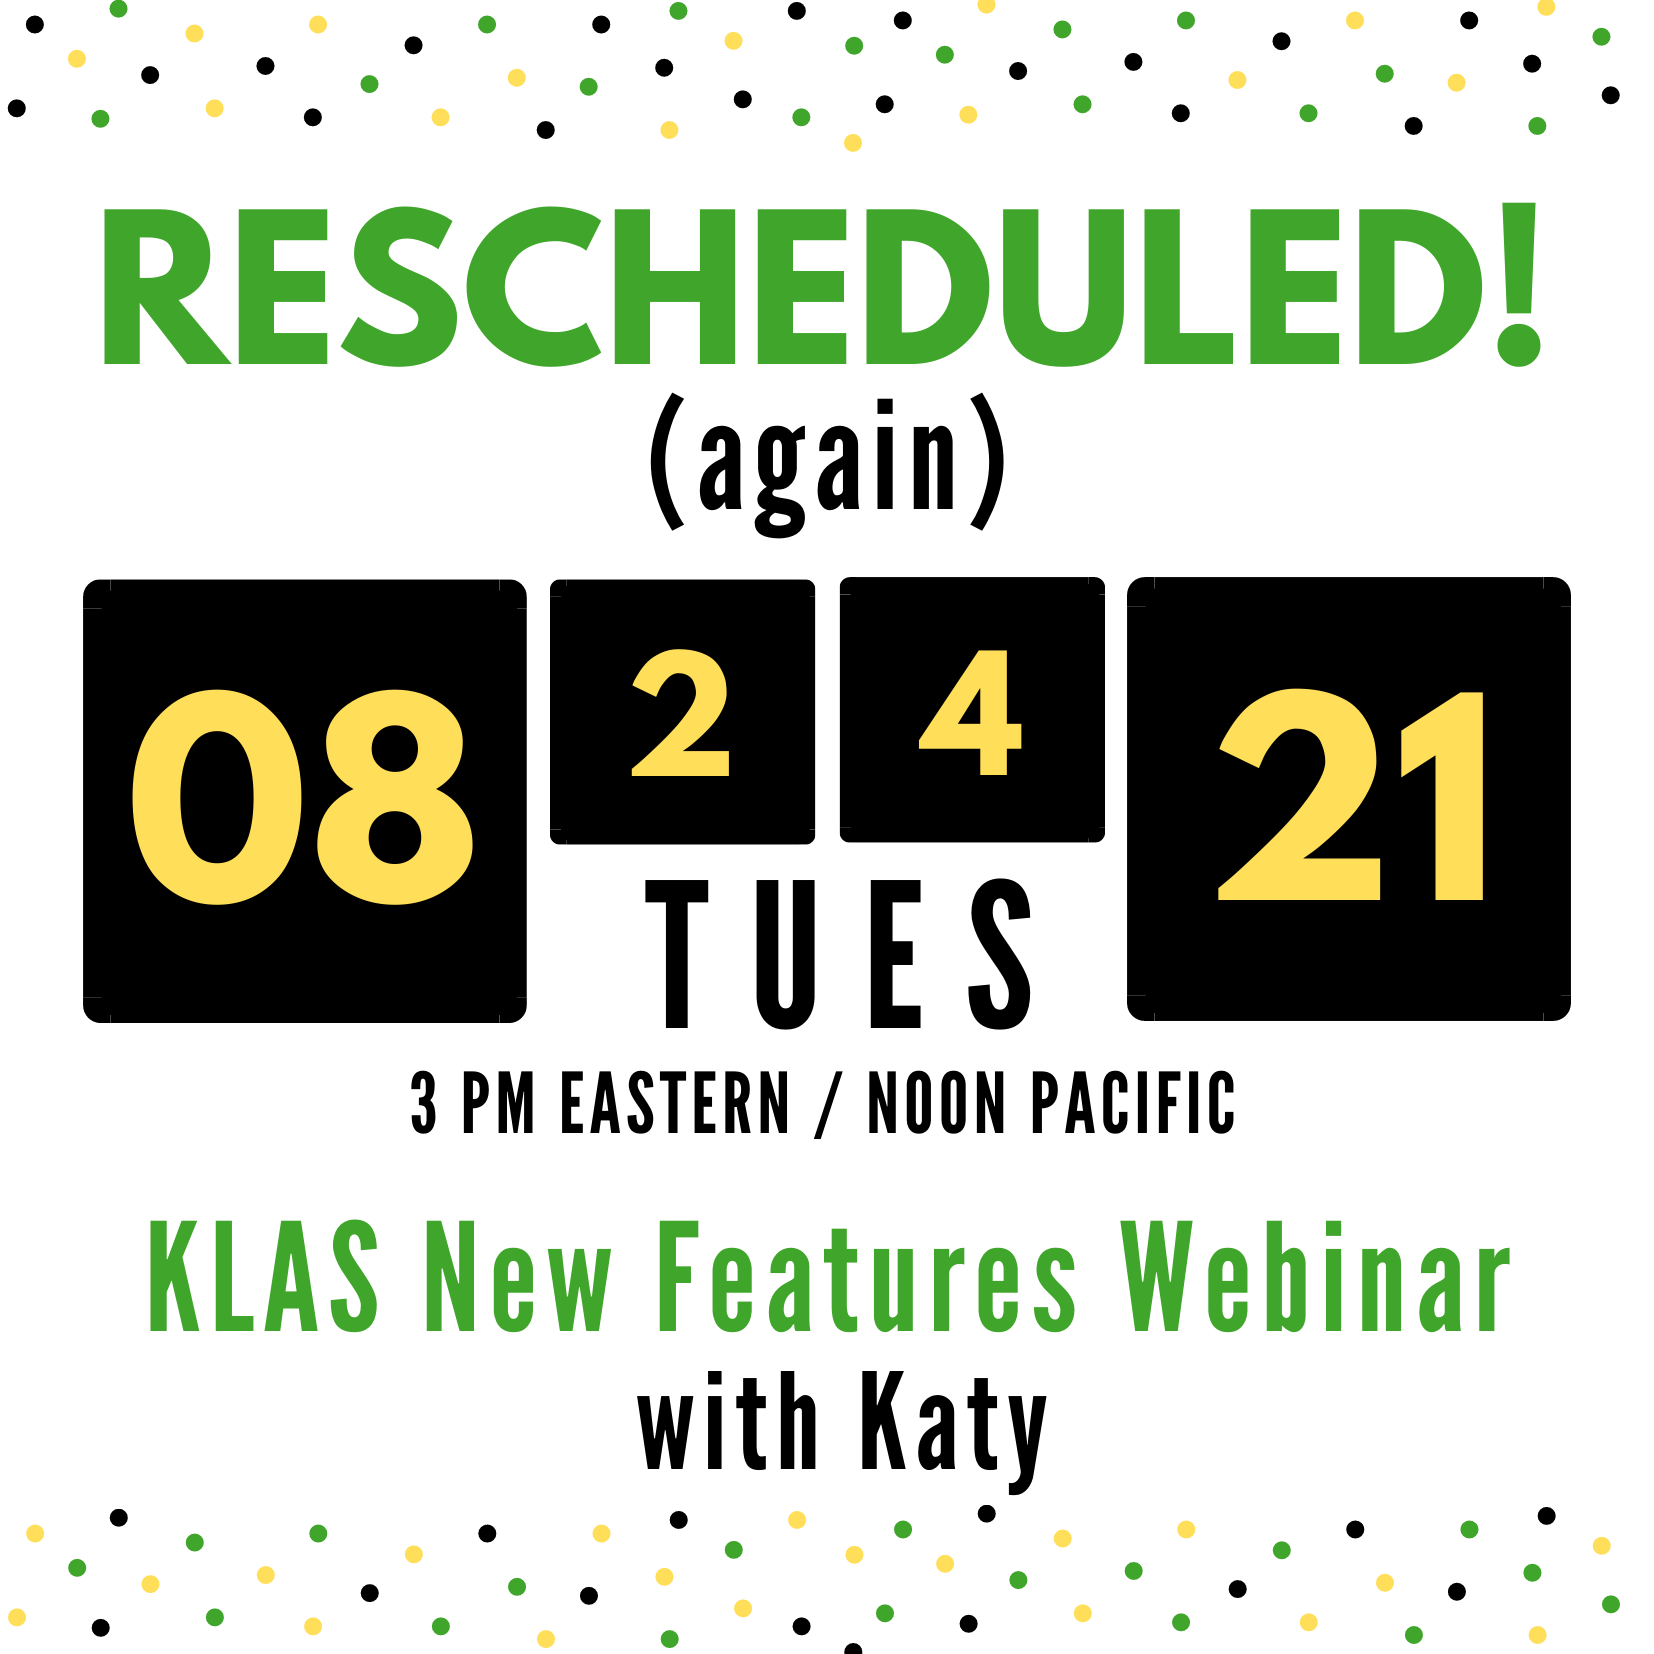 RESCHEDULED (again)! On Tuesday, August 24, 2021 at 3 PM ET / Noon PT Katy will host our next KLAS New Features webinar.